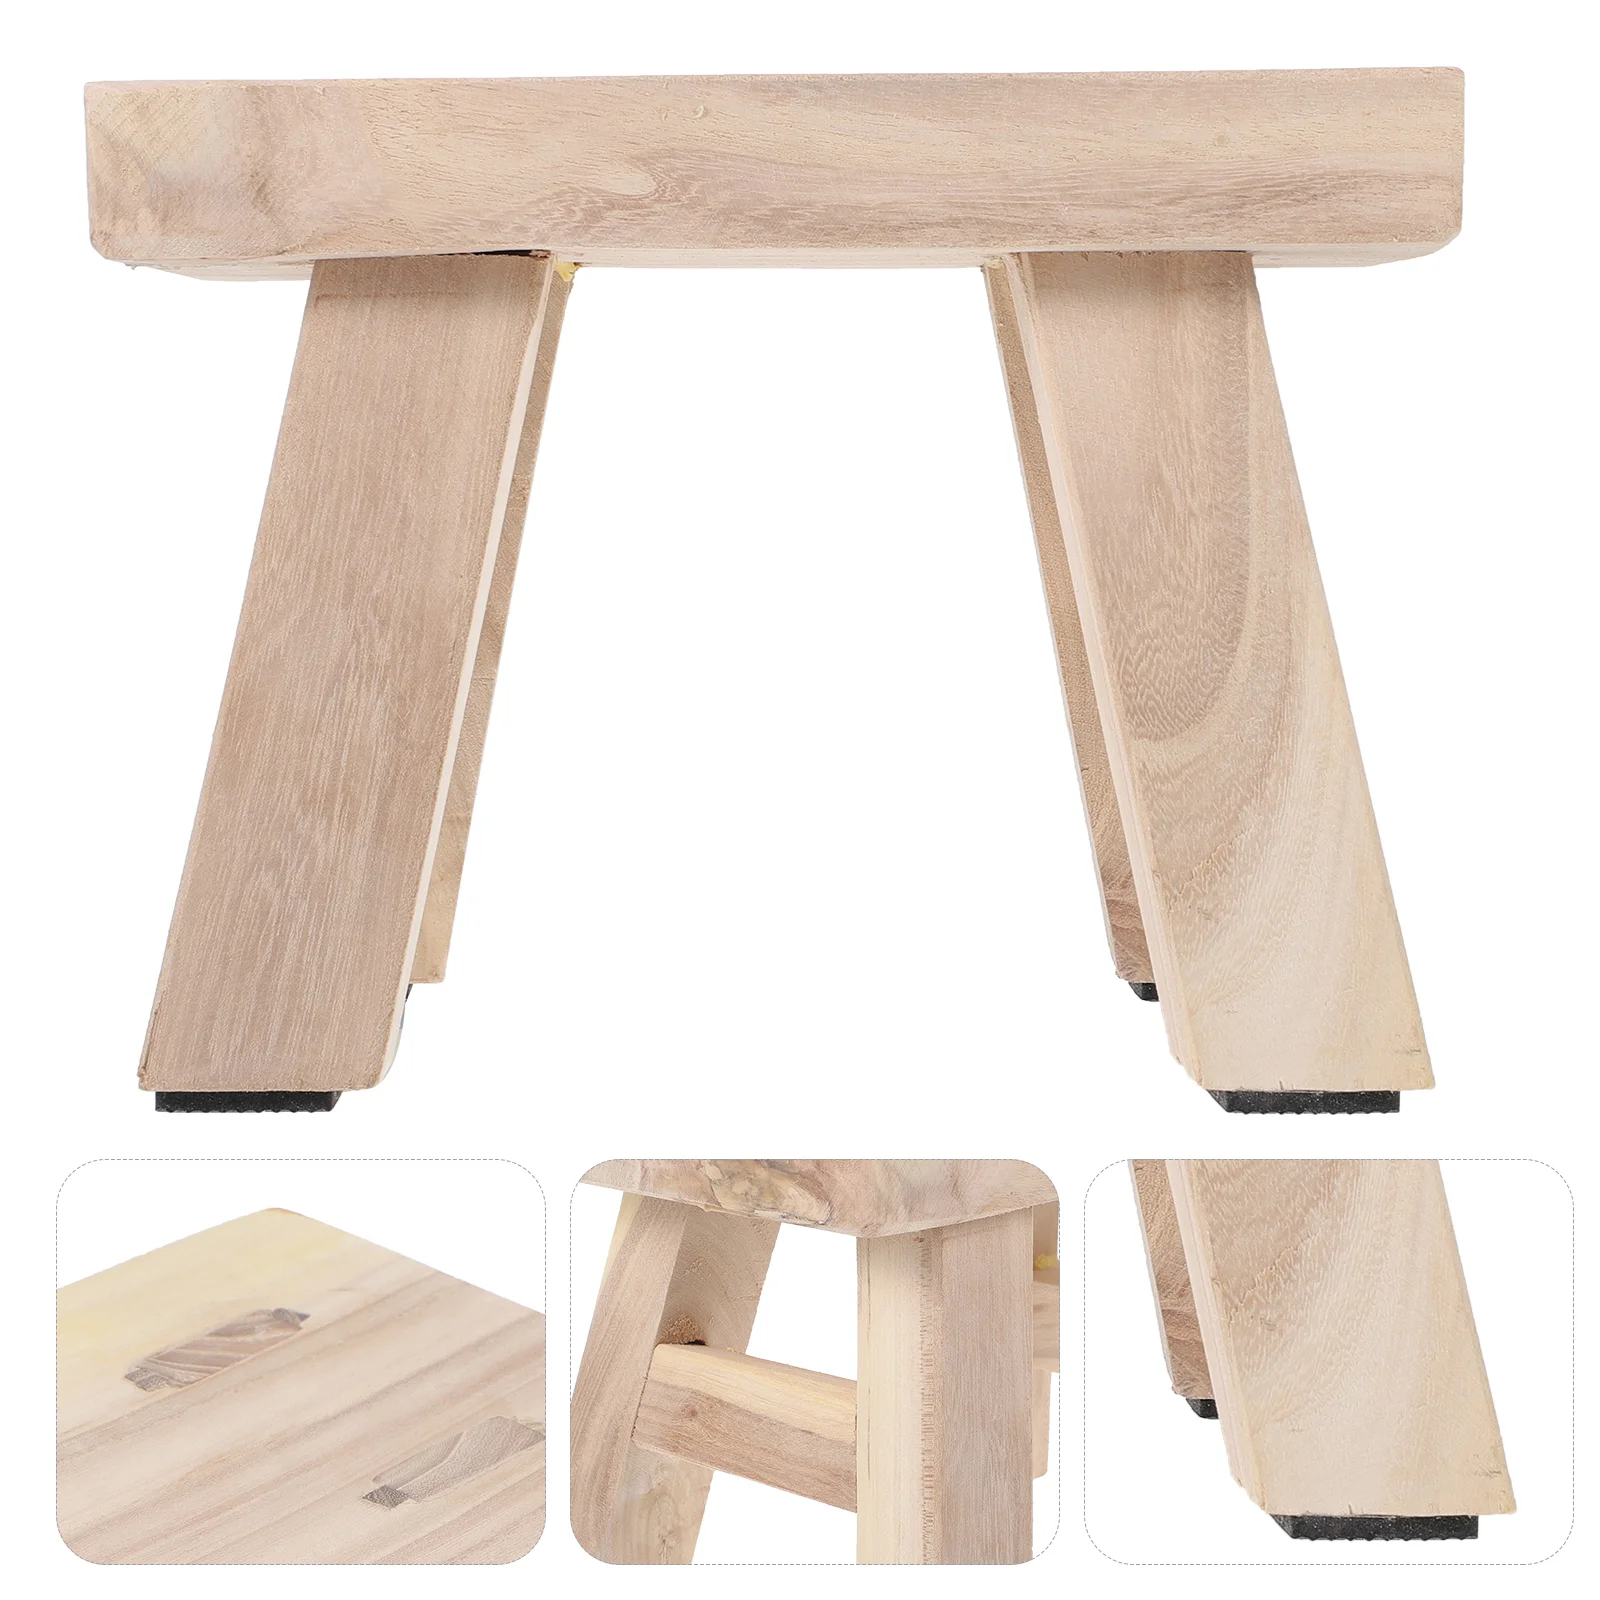 

Stools Solid Wood Bench for Kids Sitting Table Legs Toddler Wooden Step Small Mini Child